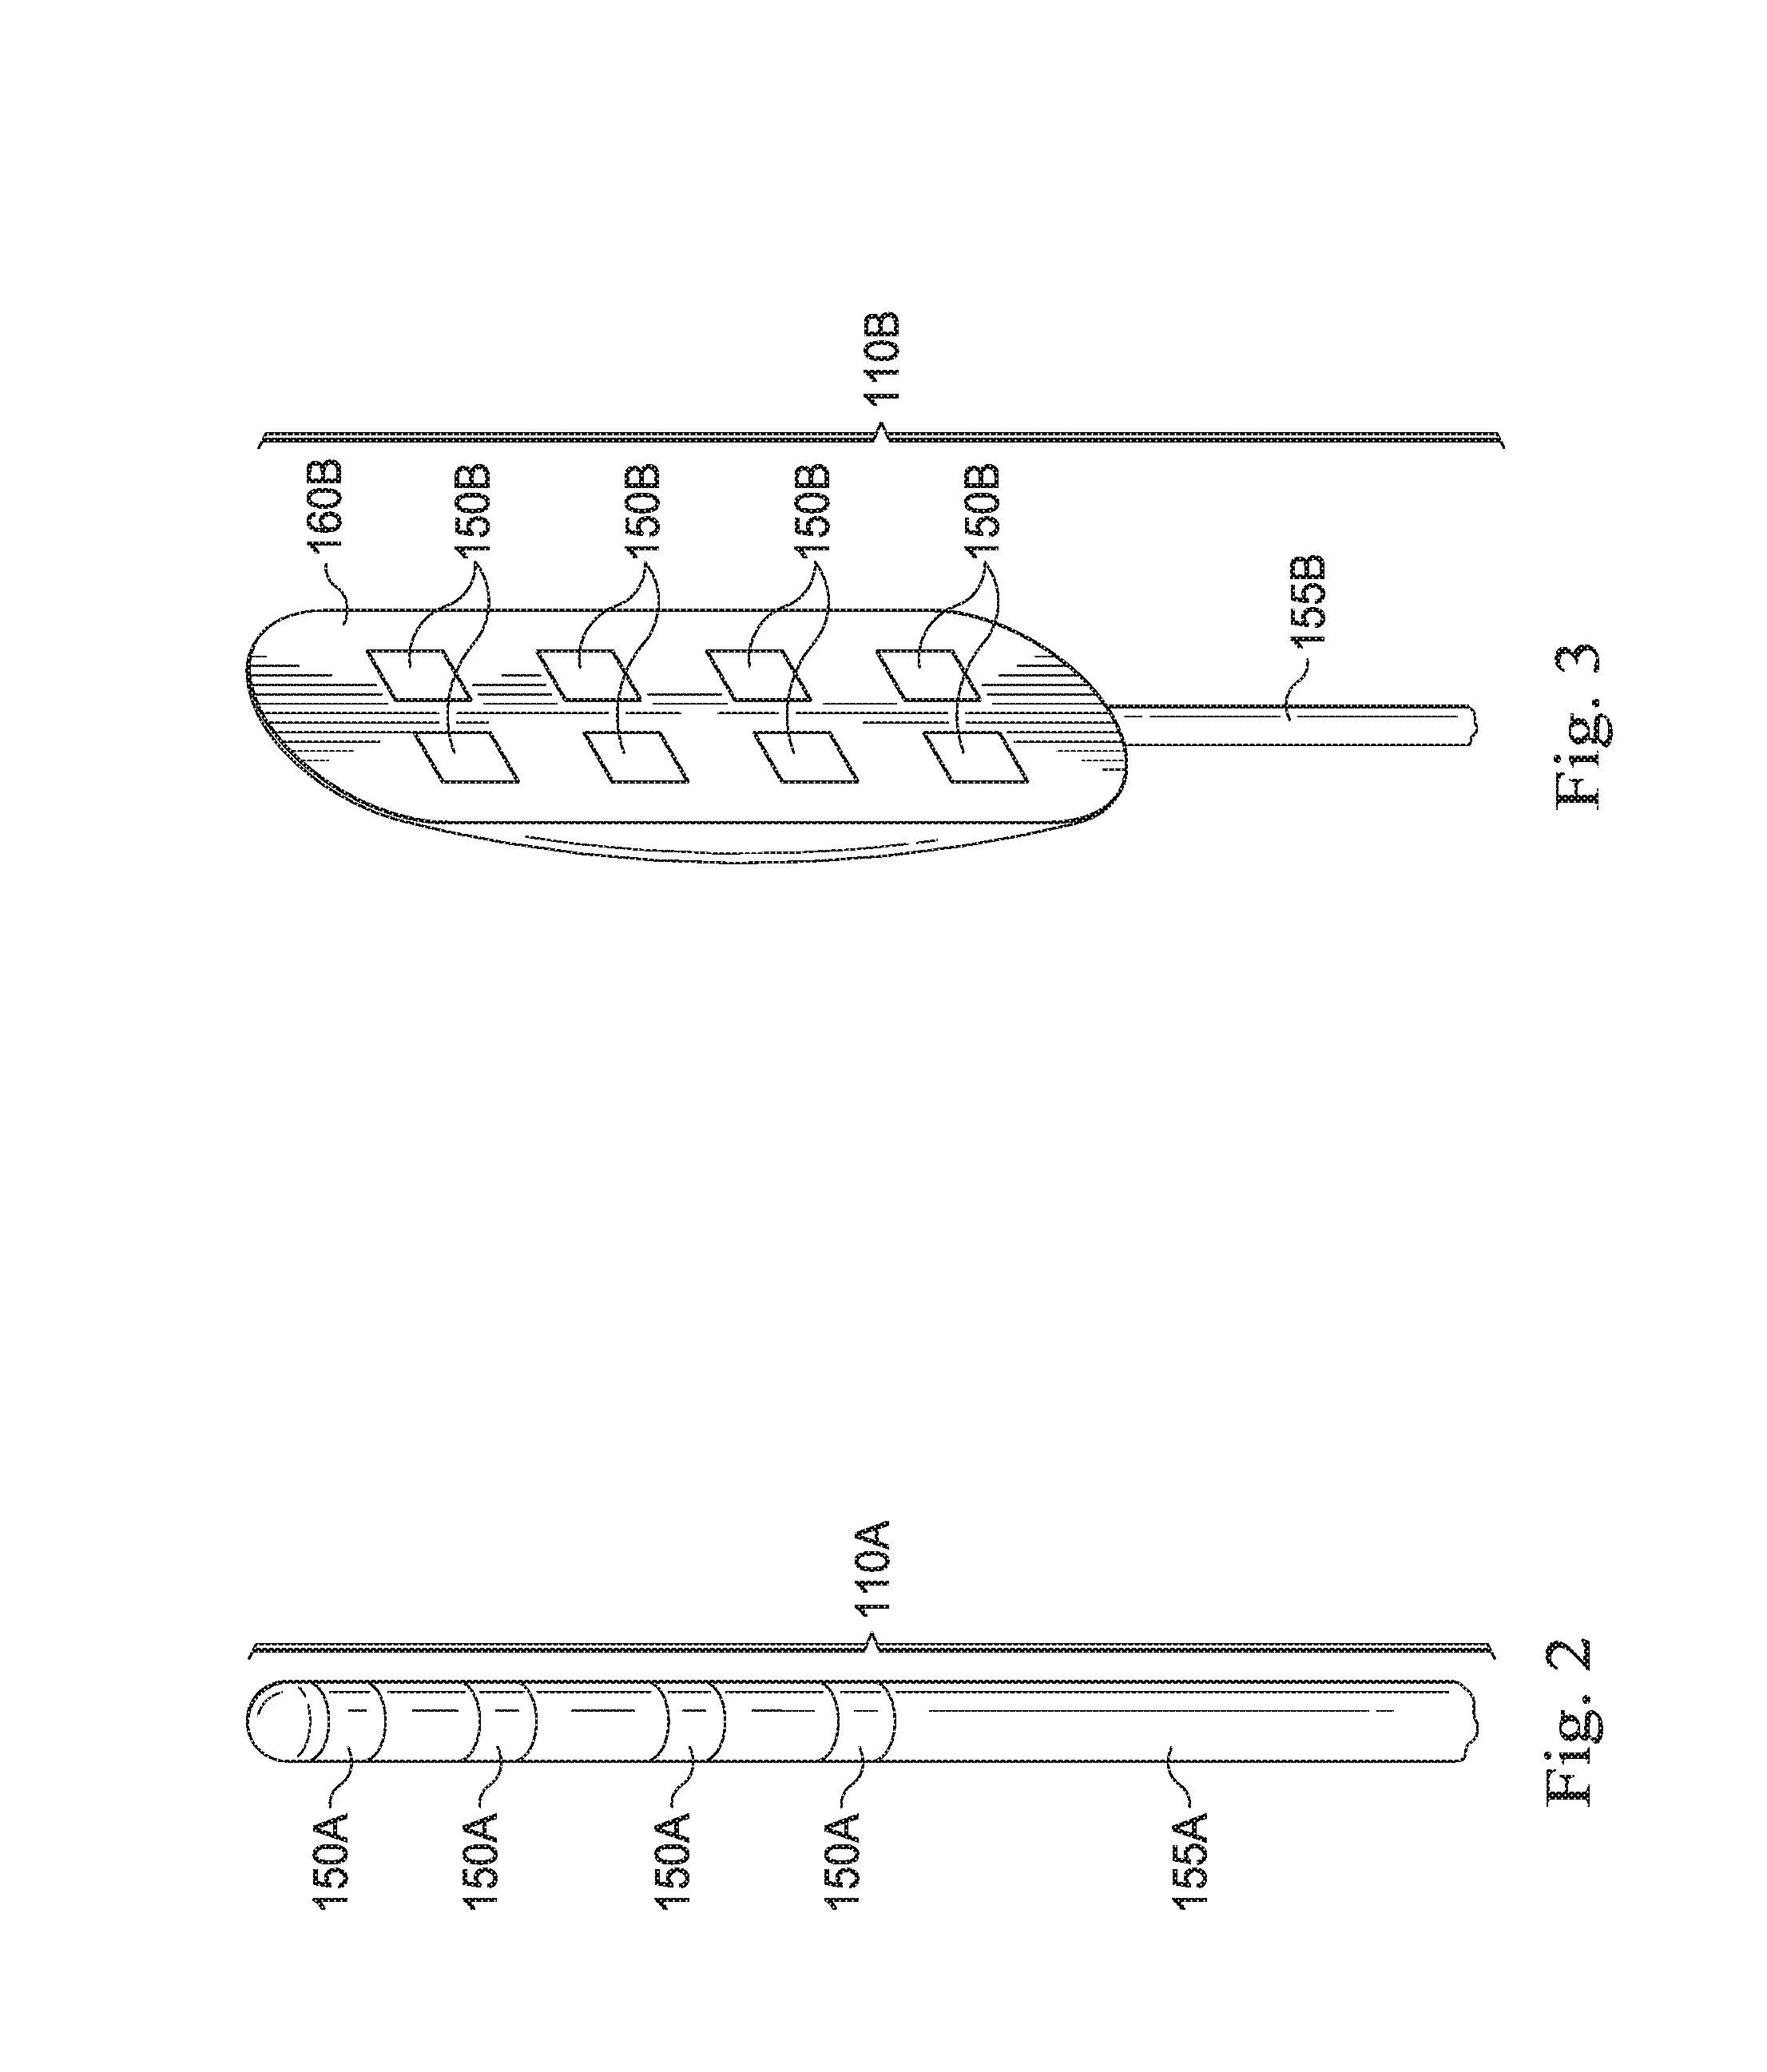 System and method of performing computer assisted stimulation programming (CASP) with a non-zero starting value customized to a patient